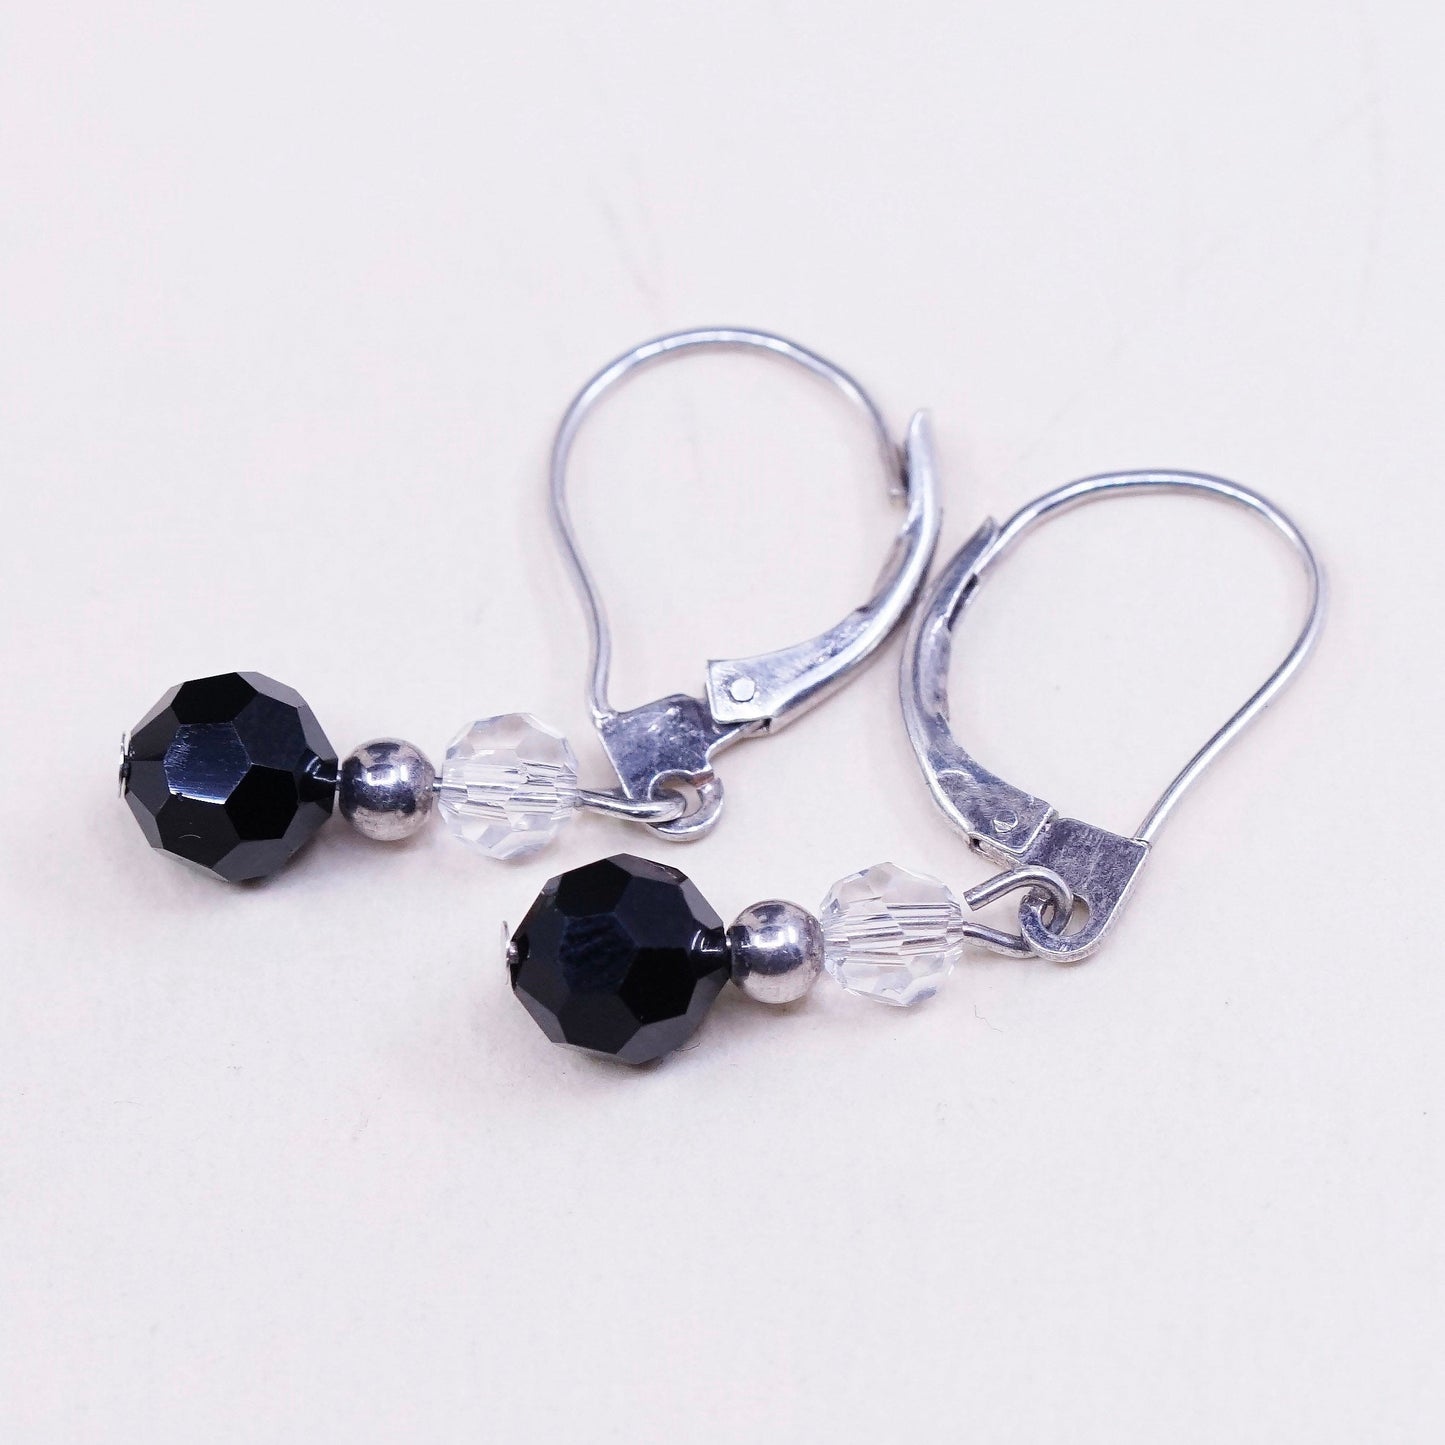 Vintage Sterling silver handmade earrings, 925 with obsidian and crystal beads